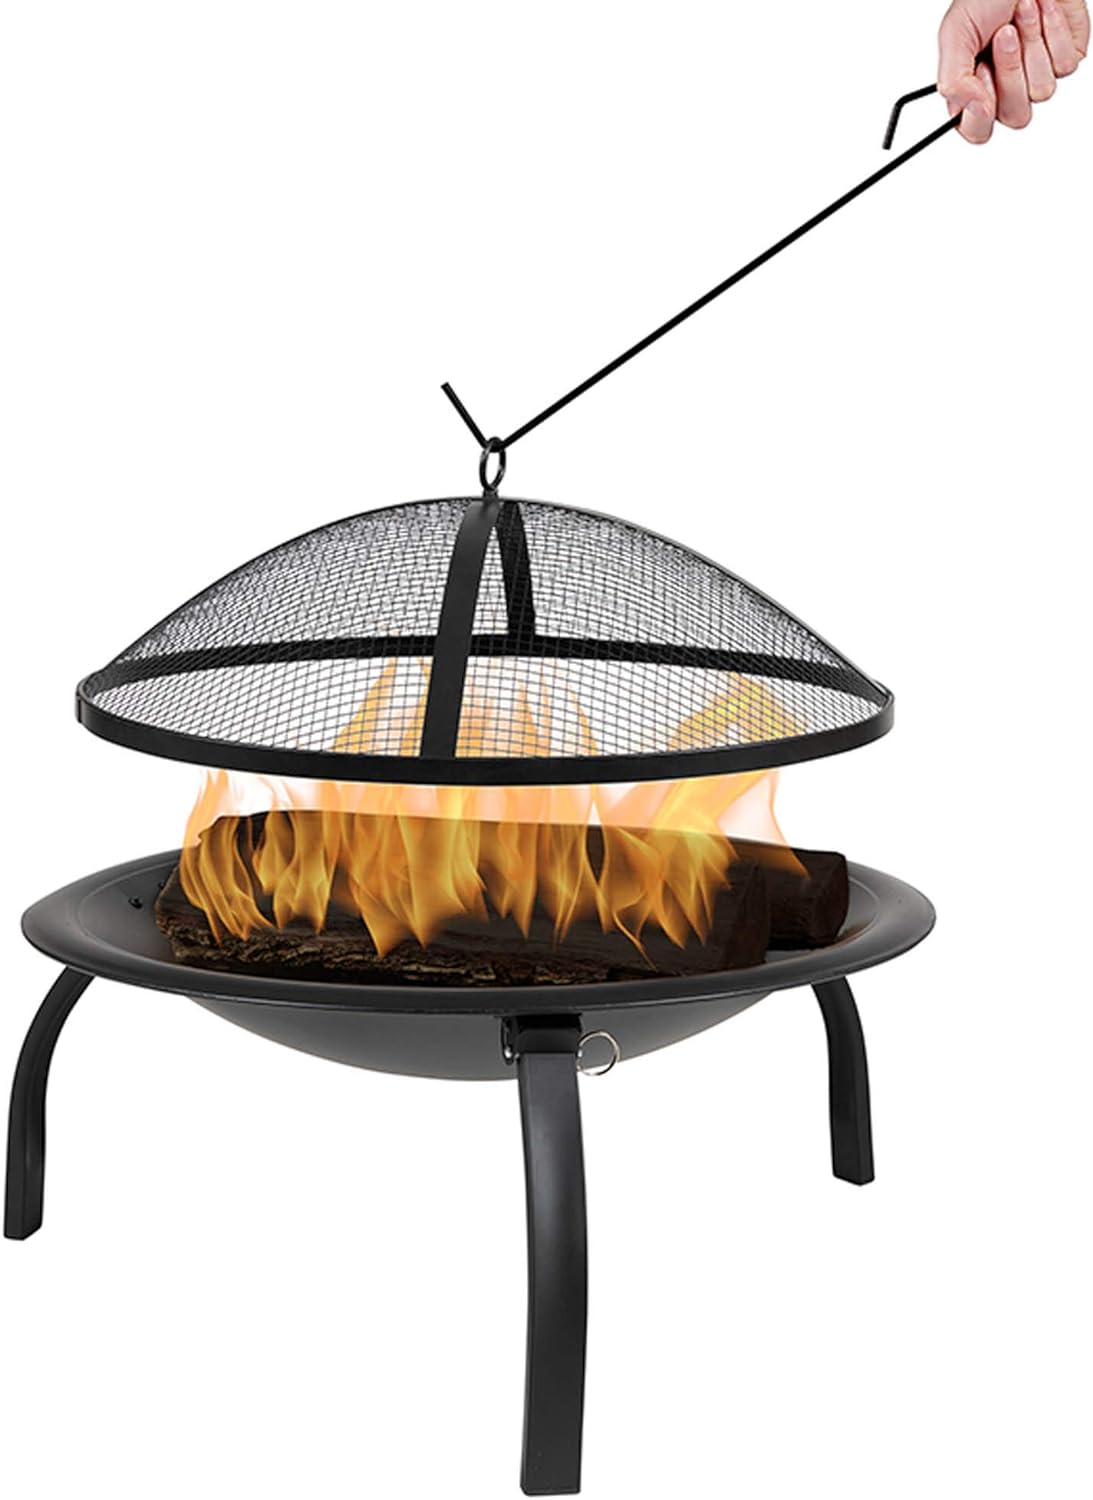 32 Inch Outdoor Fire Pit